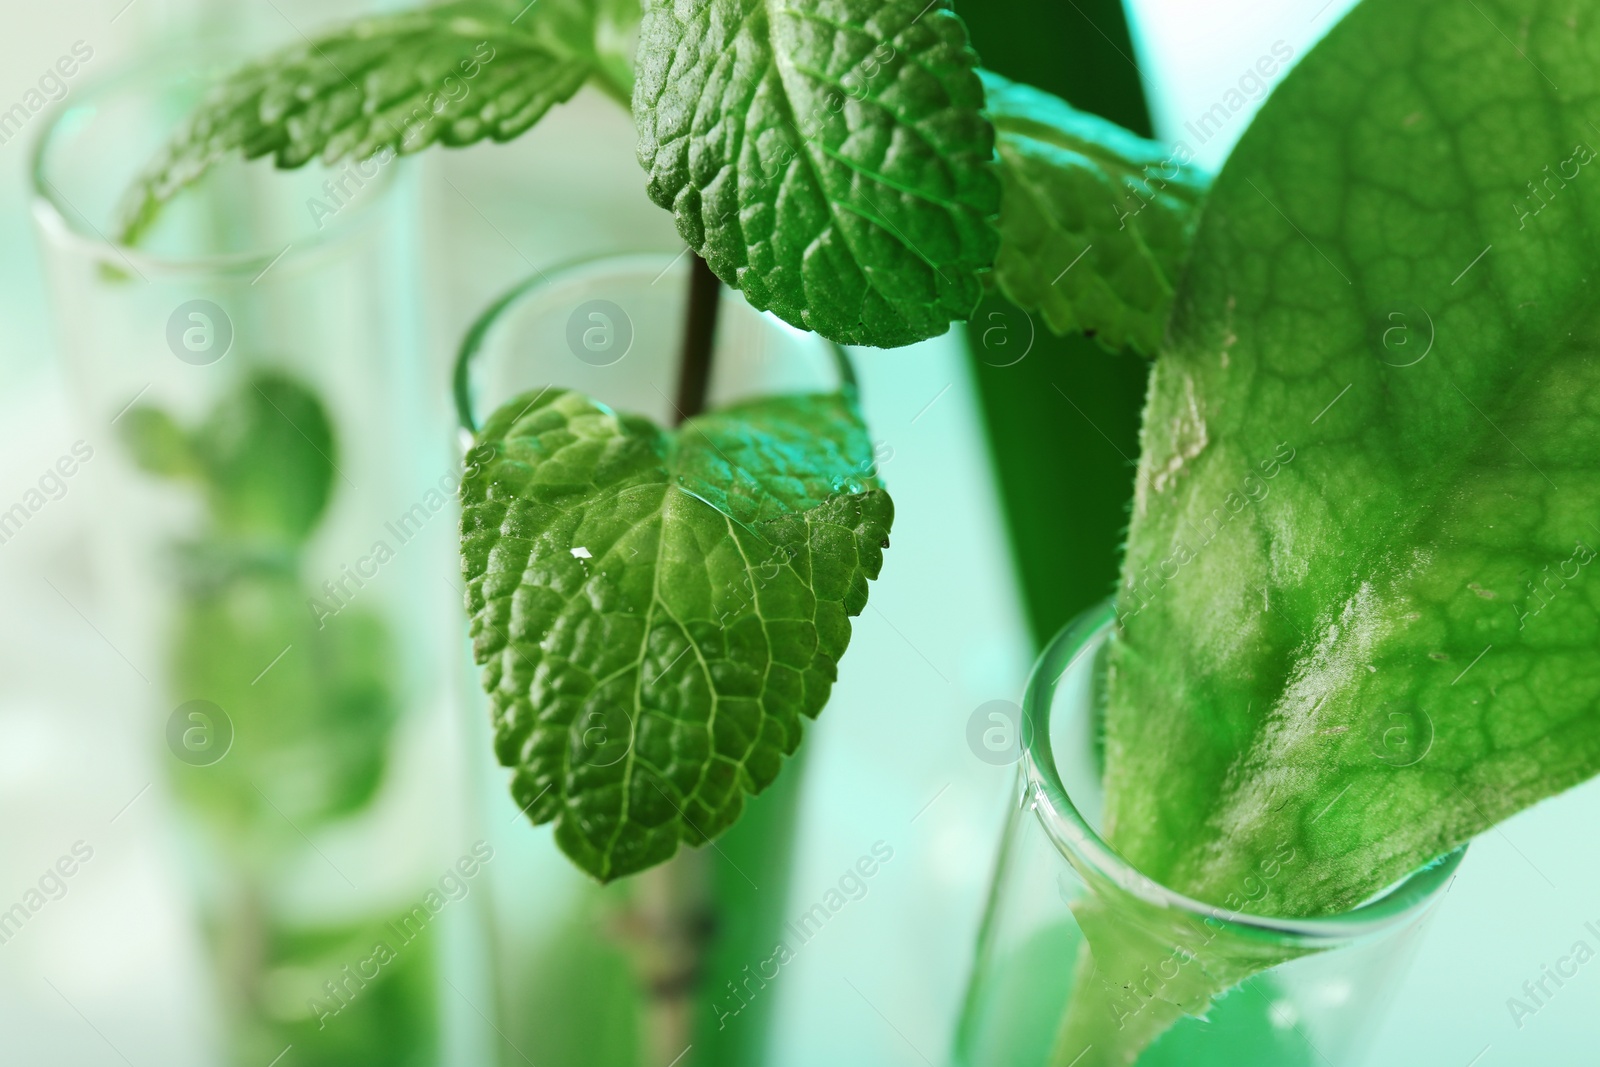 Photo of Green plants in test tubes on blurred background, closeup. Biological chemistry